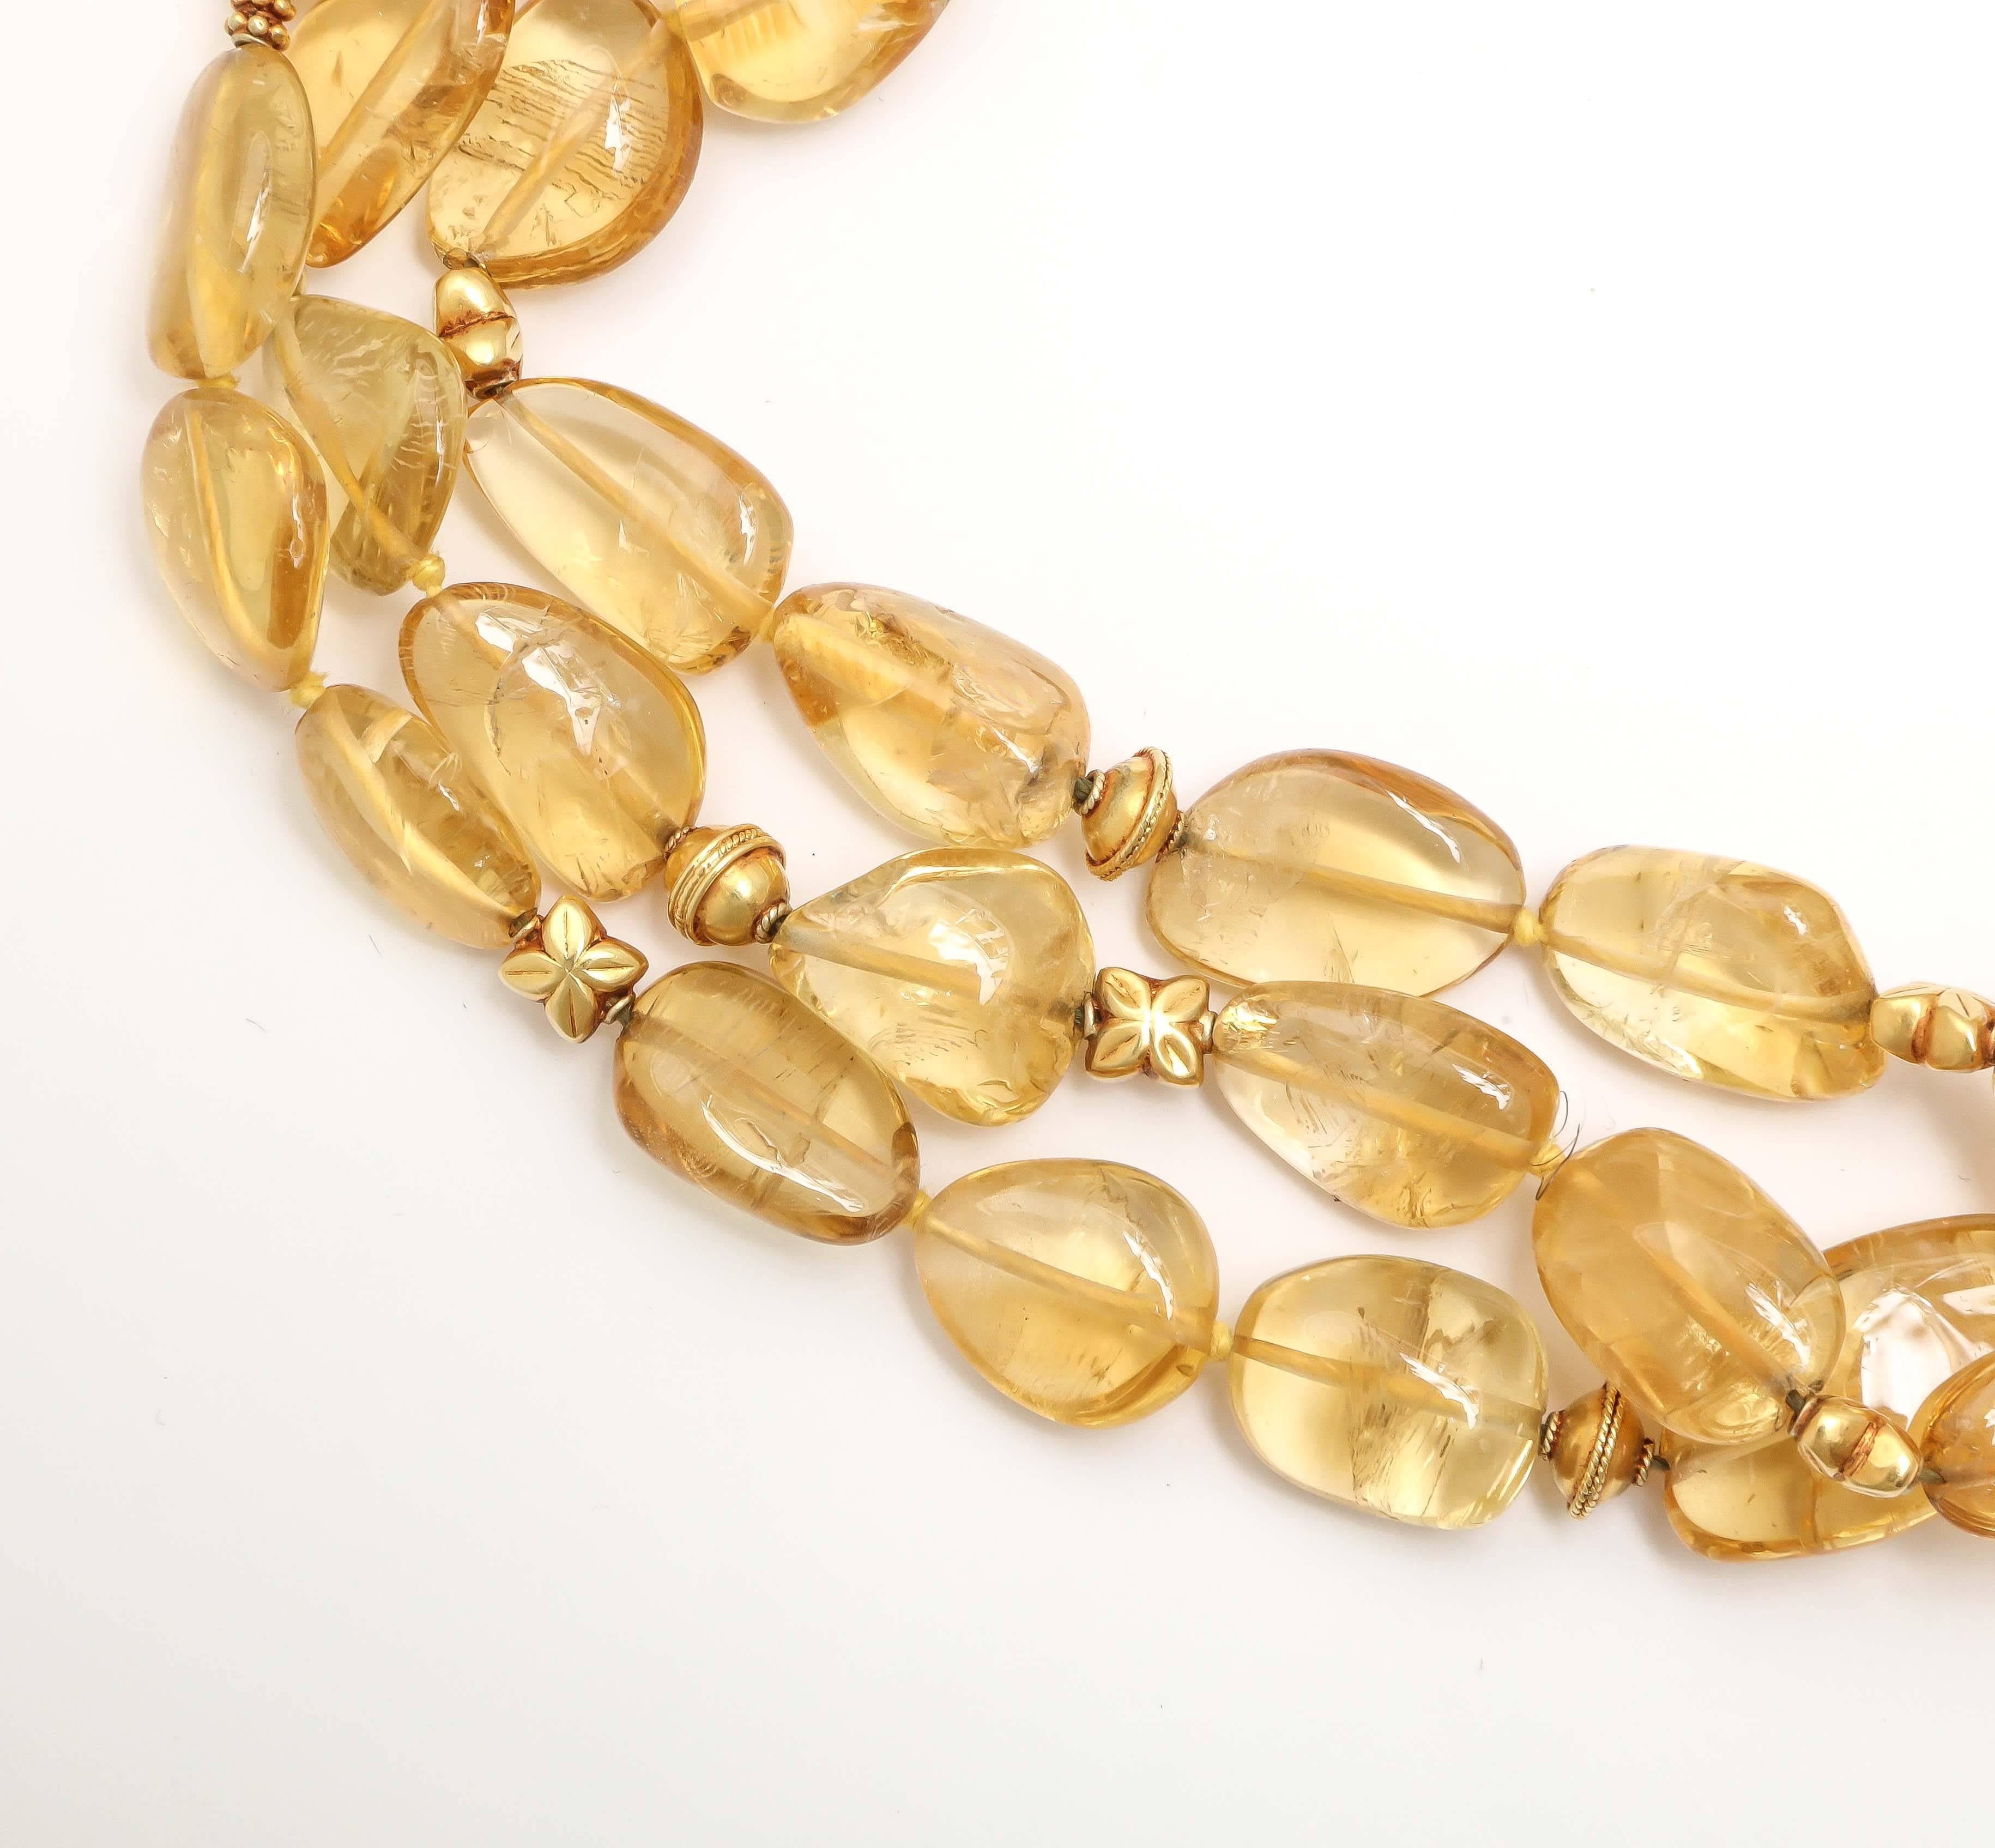 Women's Pat Saling Triple Strand Citrine Gold Bead Necklace For Sale